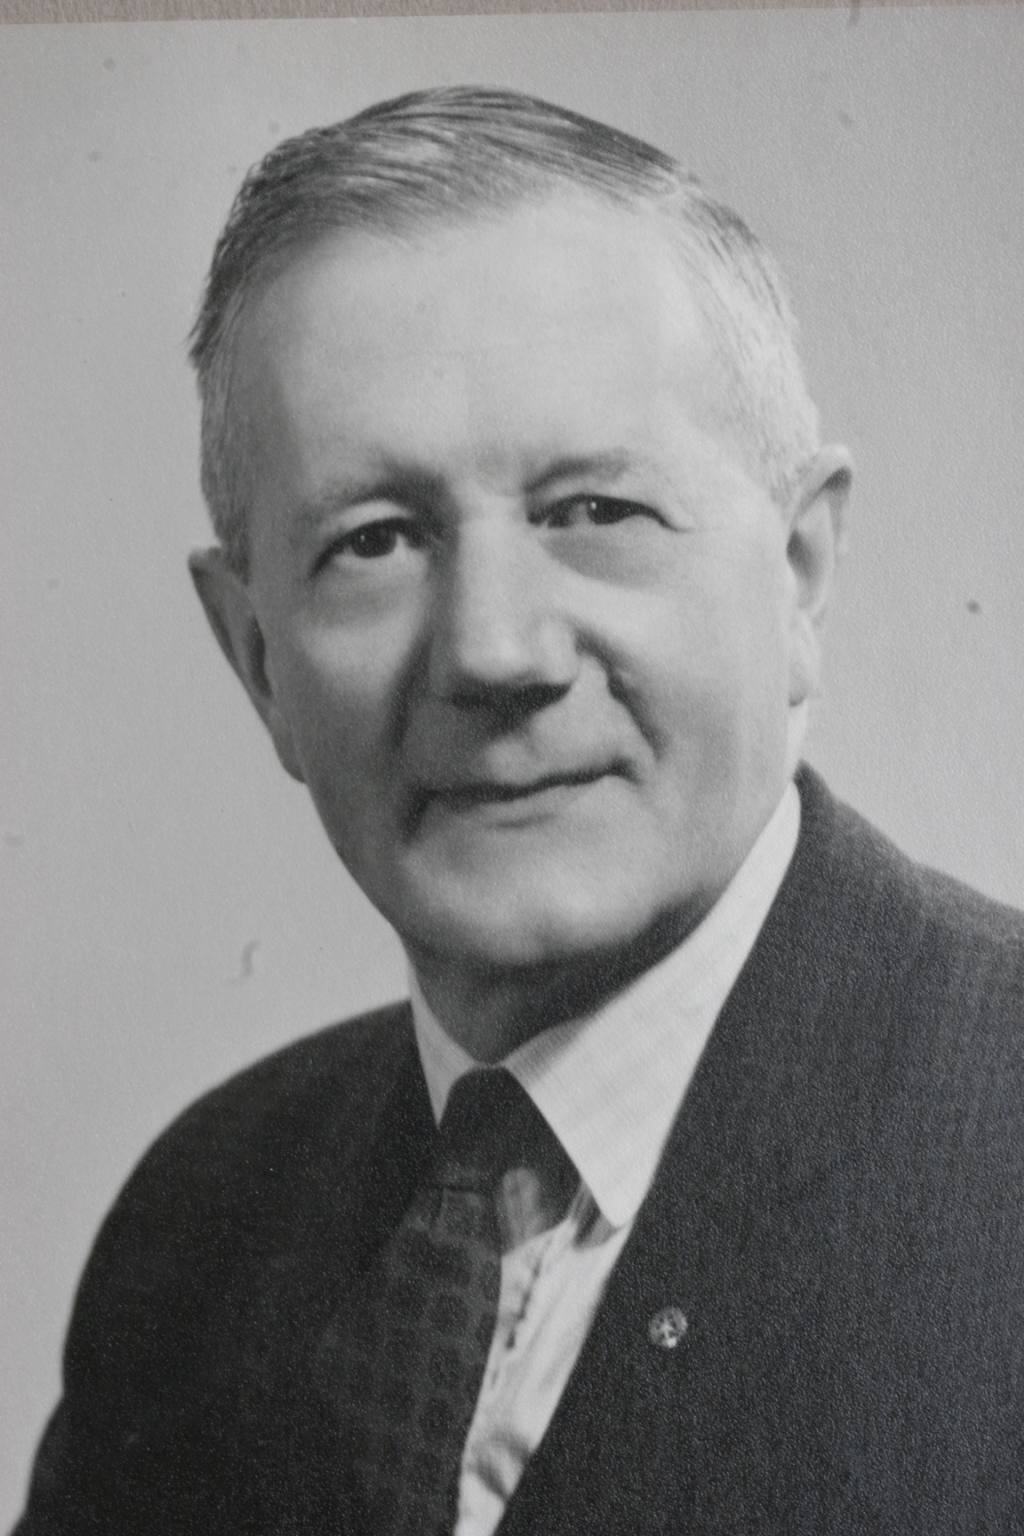 Past Presidents 1960-1969 (click here) - Bryan R. Bentall 1960/1